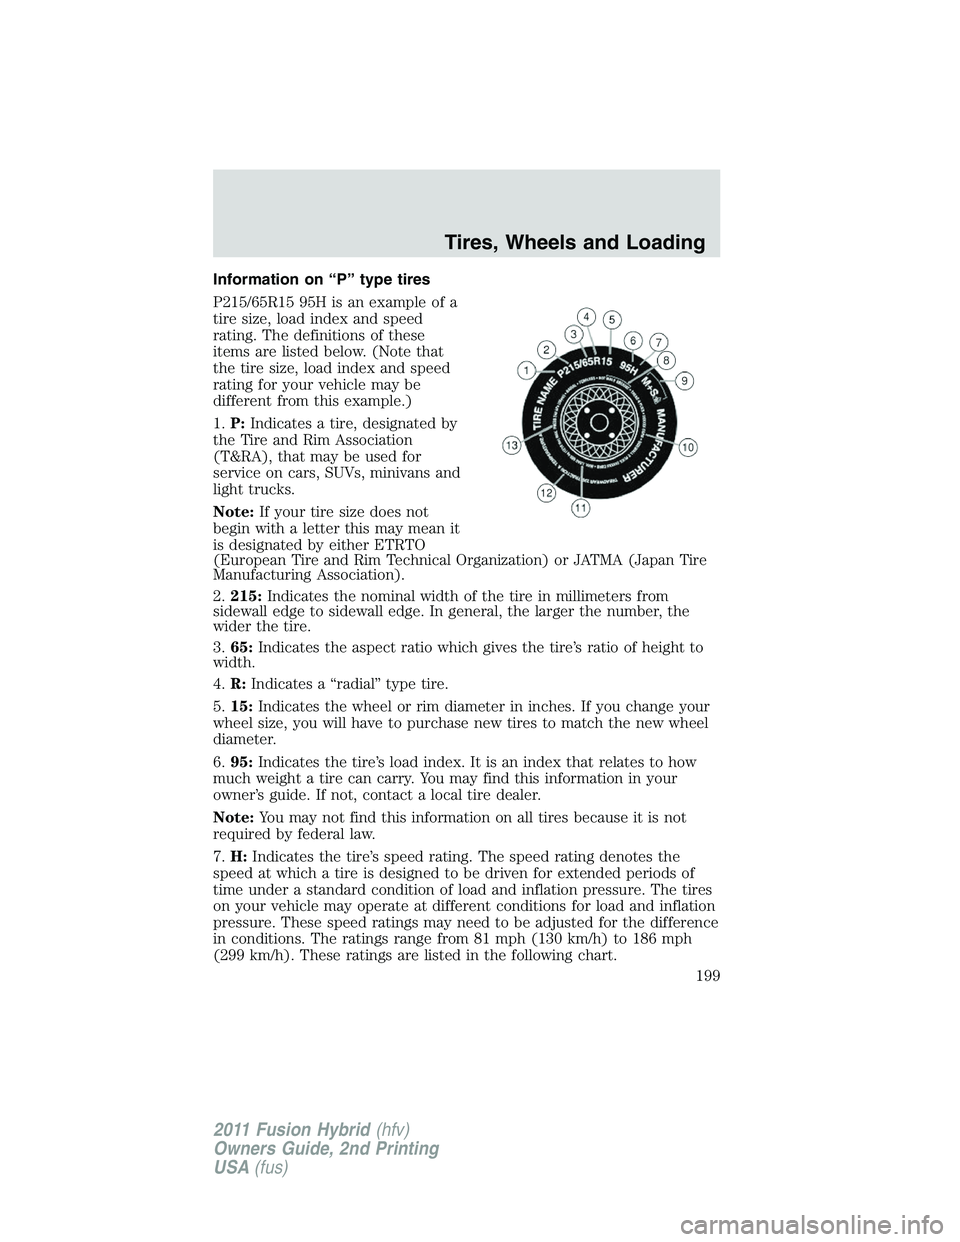 FORD FUSION HYBRID 2011  Owners Manual Information on “P” type tires
P215/65R15 95H is an example of a
tire size, load index and speed
rating. The definitions of these
items are listed below. (Note that
the tire size, load index and sp